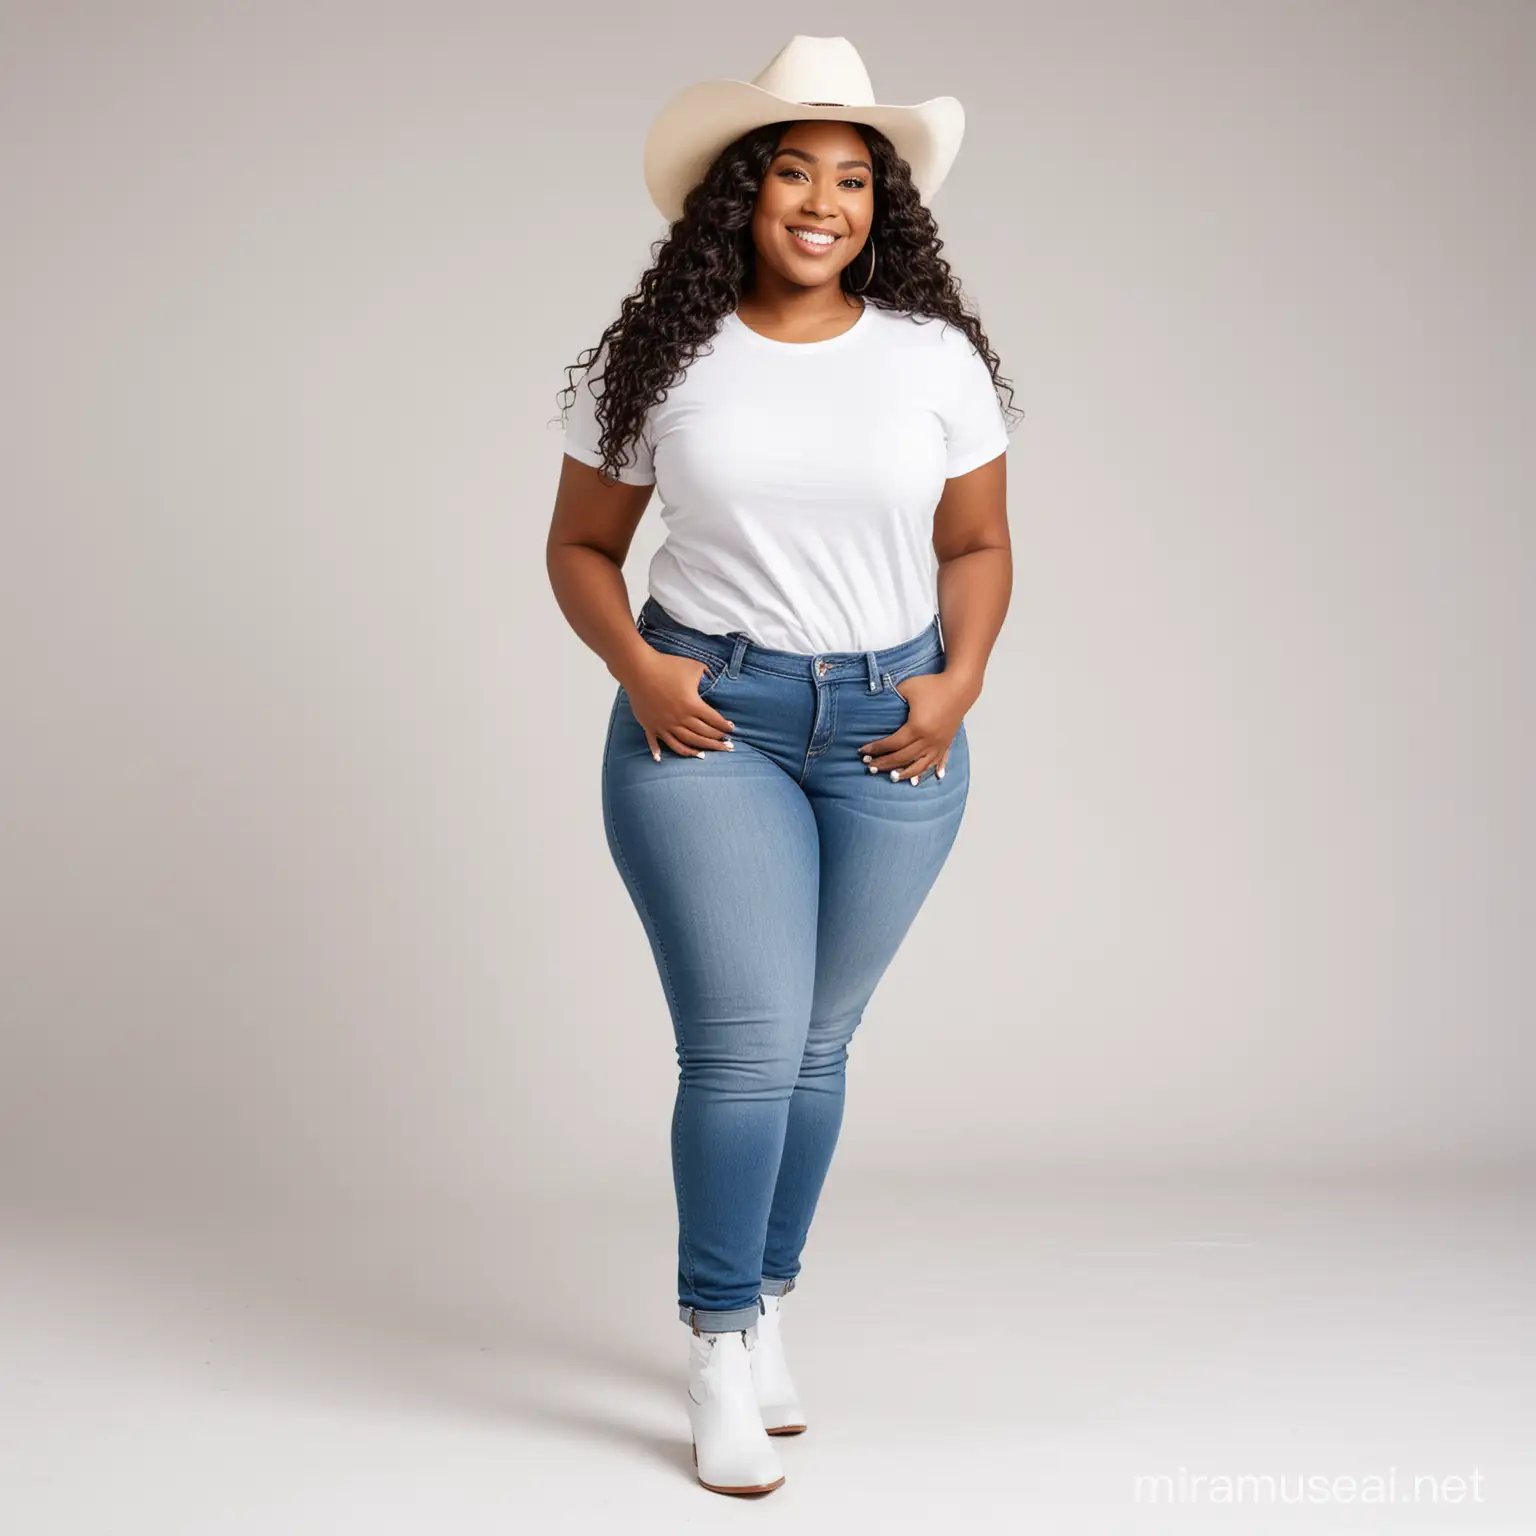 Smiling Plus Size African American Woman in White Cowboy Hat and Boots